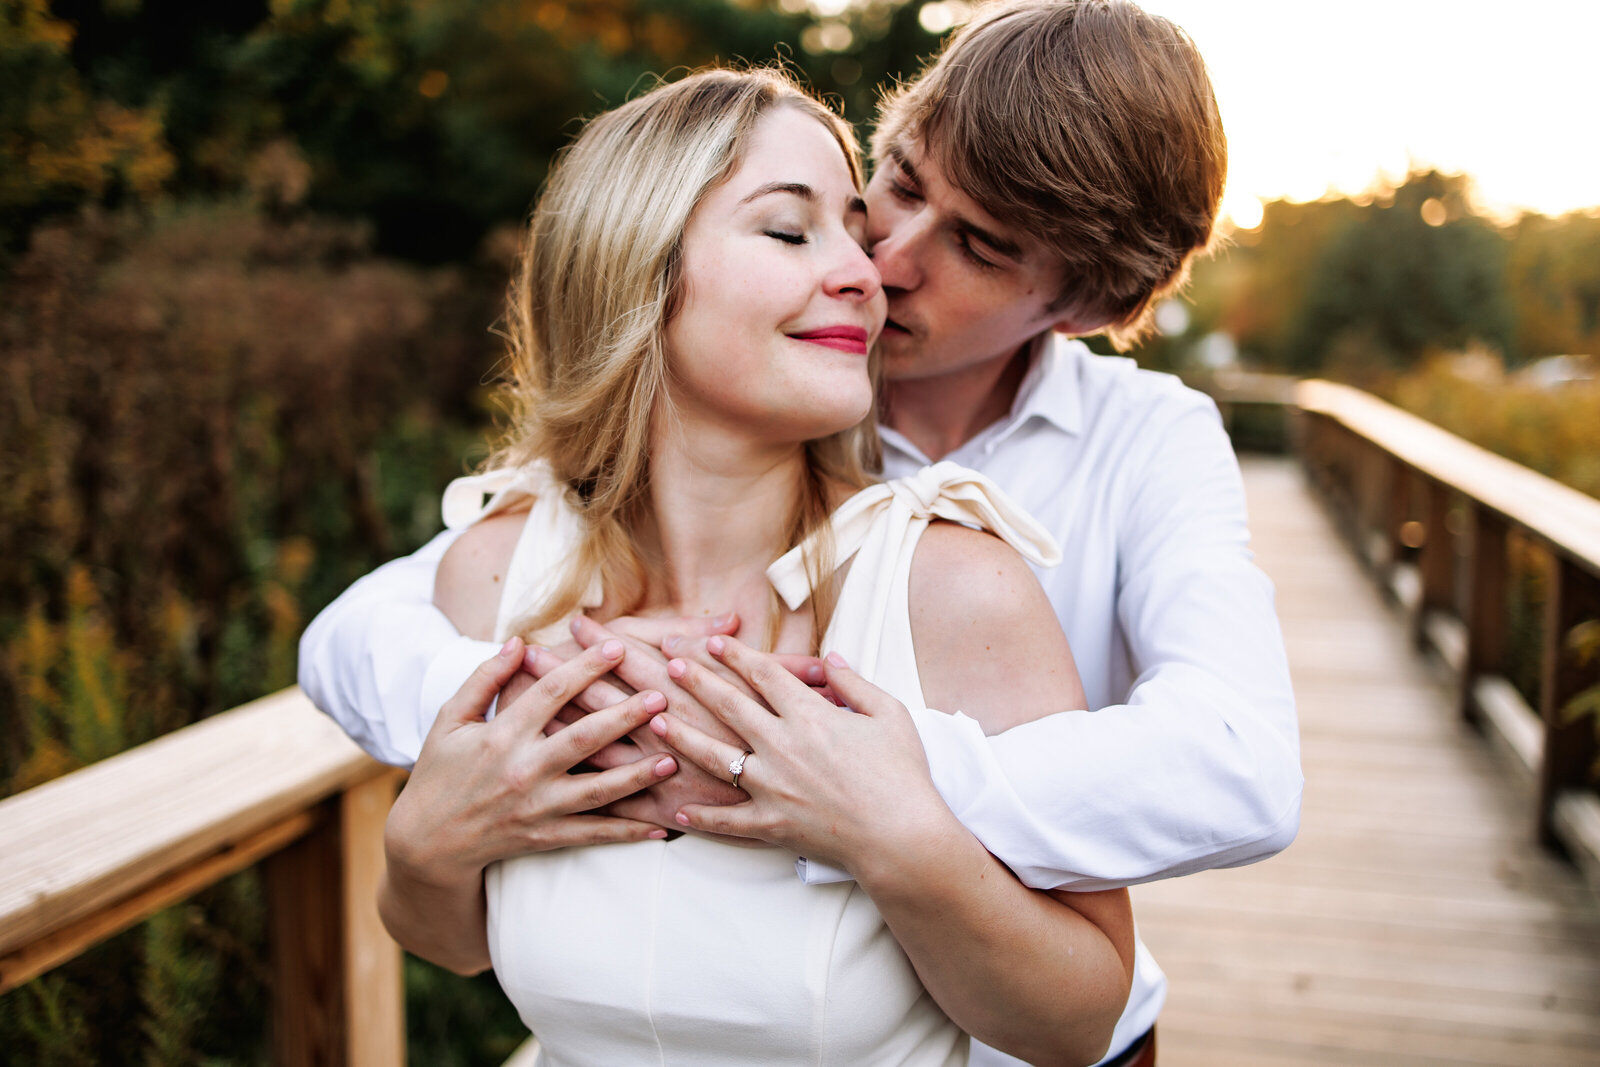 Man intimately embraces is fiancé from behind and kisses her cheek